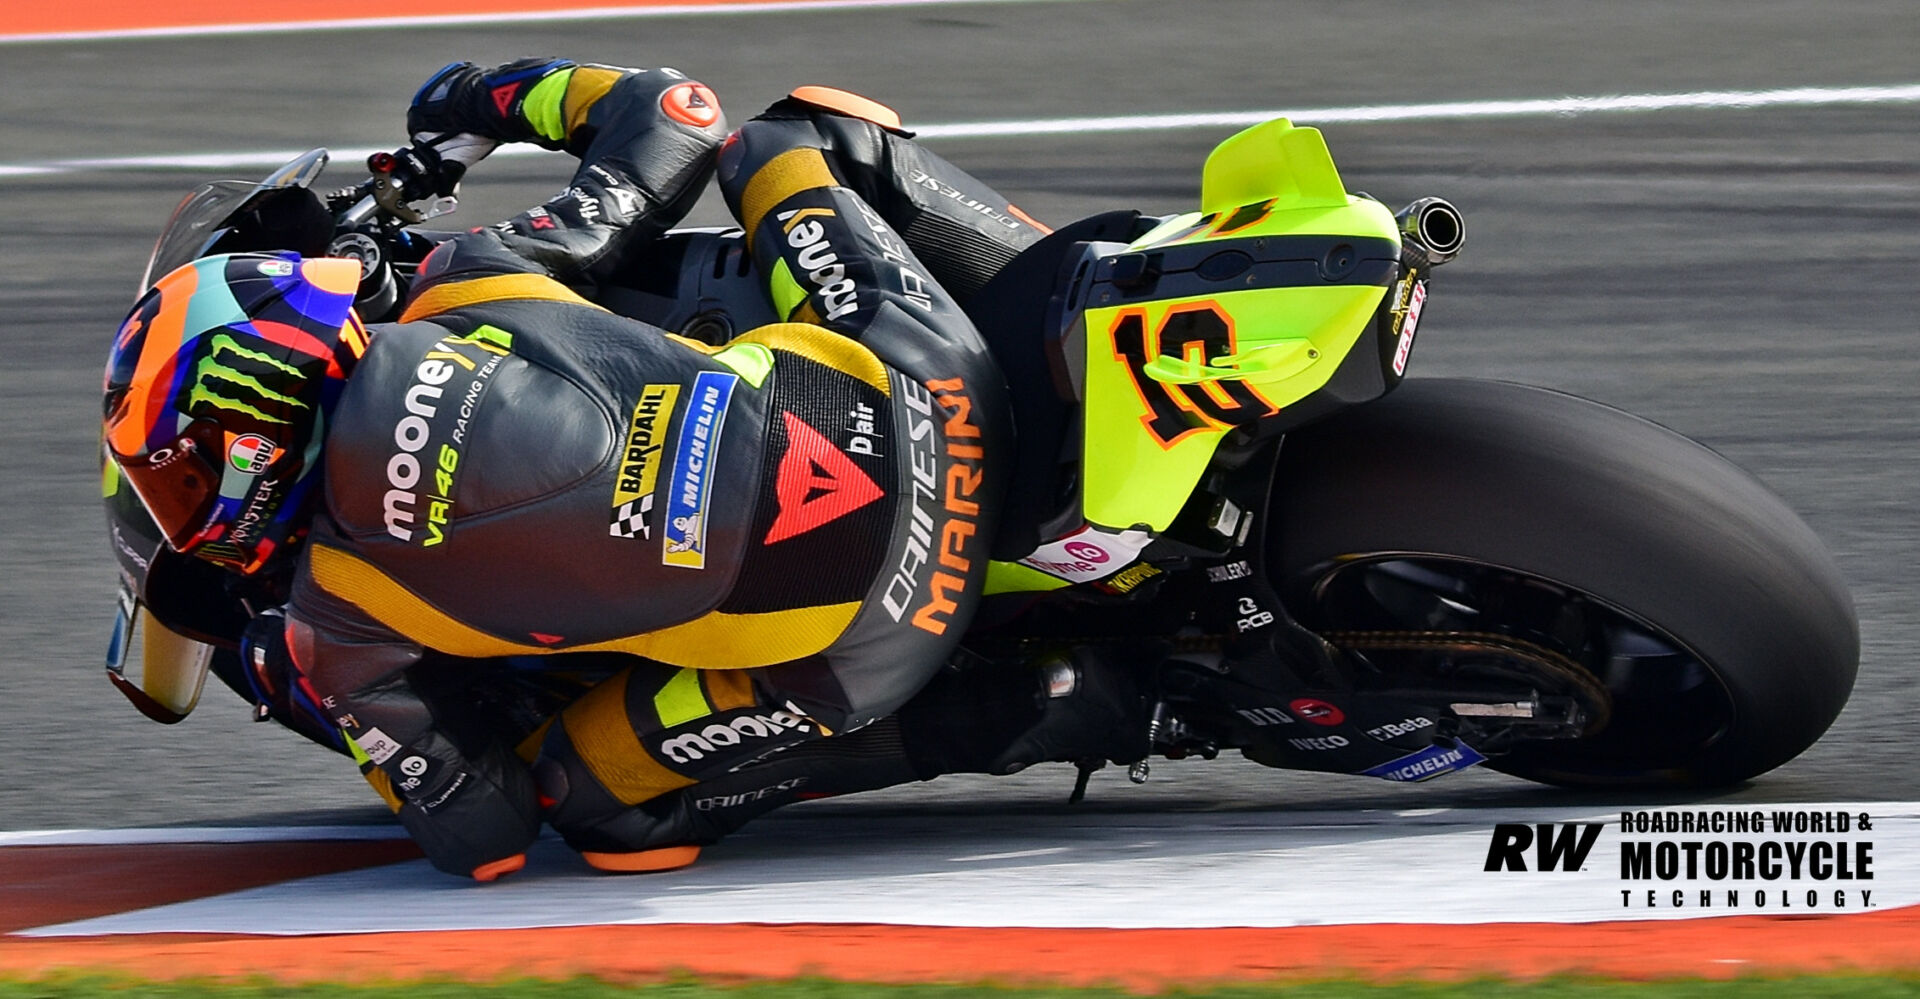 Luca Marini (10) had no new components to test, but got down to the business of getting the most from his existing Mooney VR46 Racing Team Ducati and turned the fastest lap of the day. Photo by Michael Gougis.